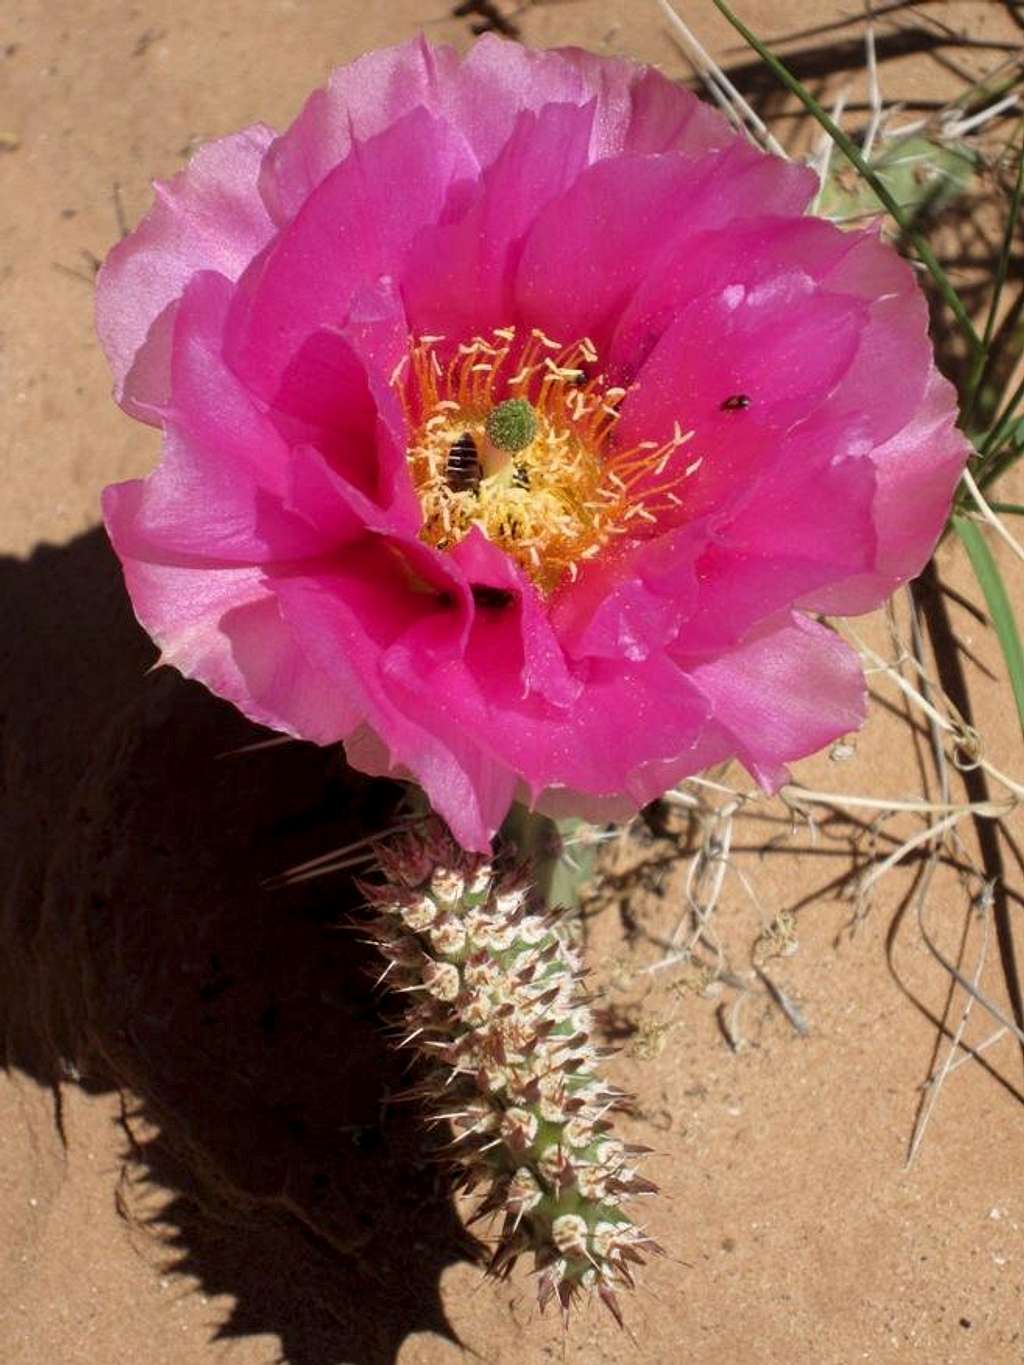 Cactus Flower and its Visitors